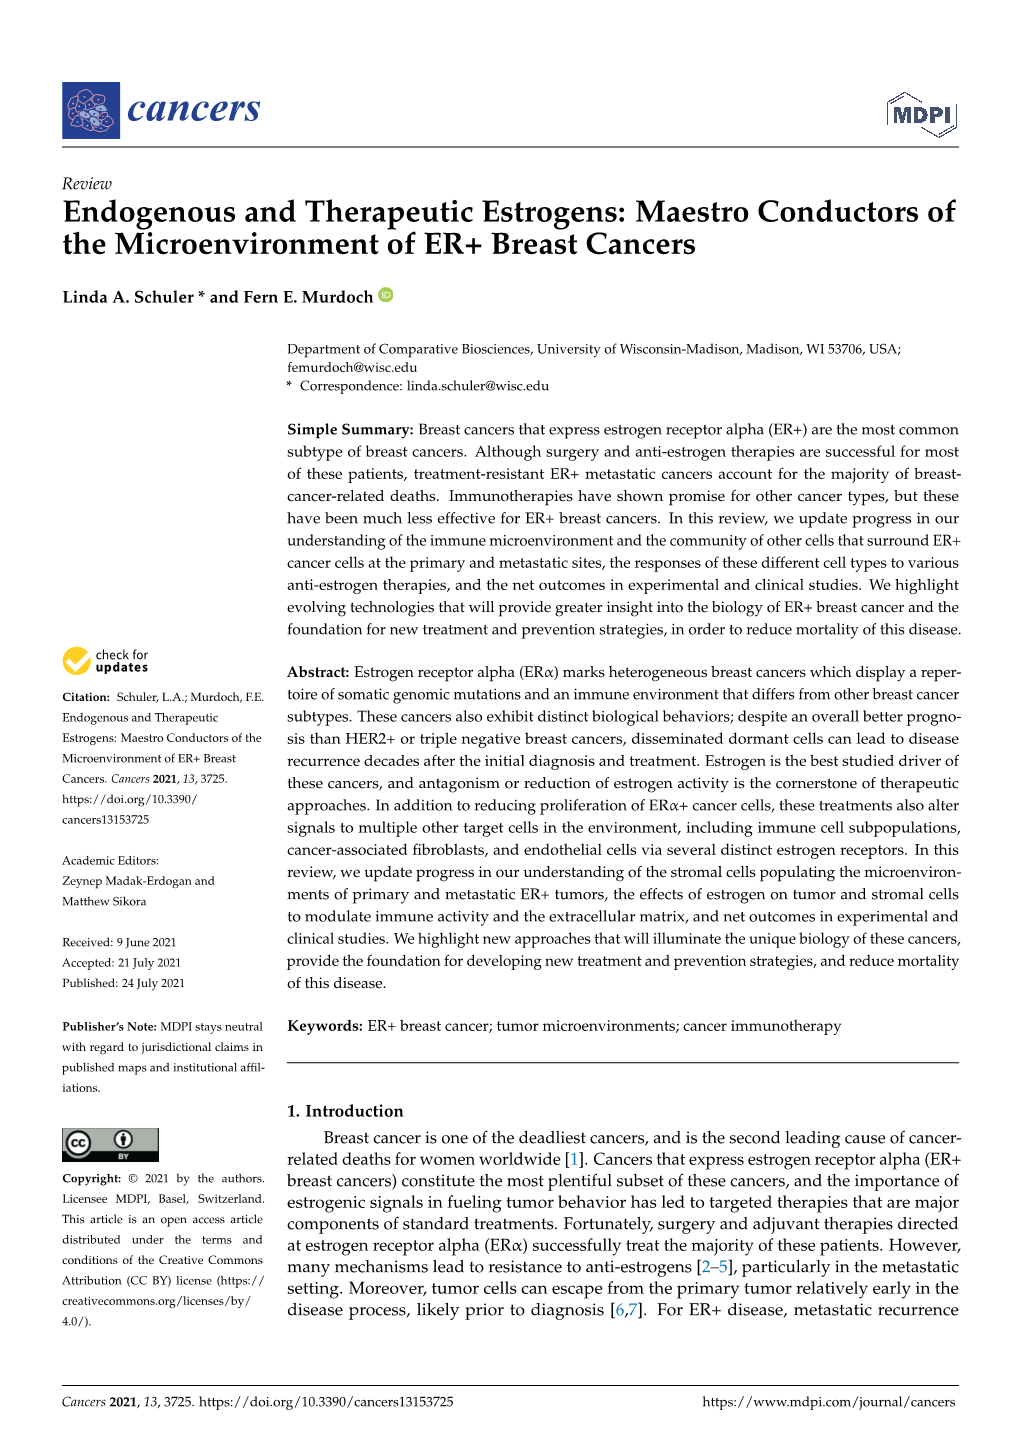 Maestro Conductors of the Microenvironment of ER+ Breast Cancers